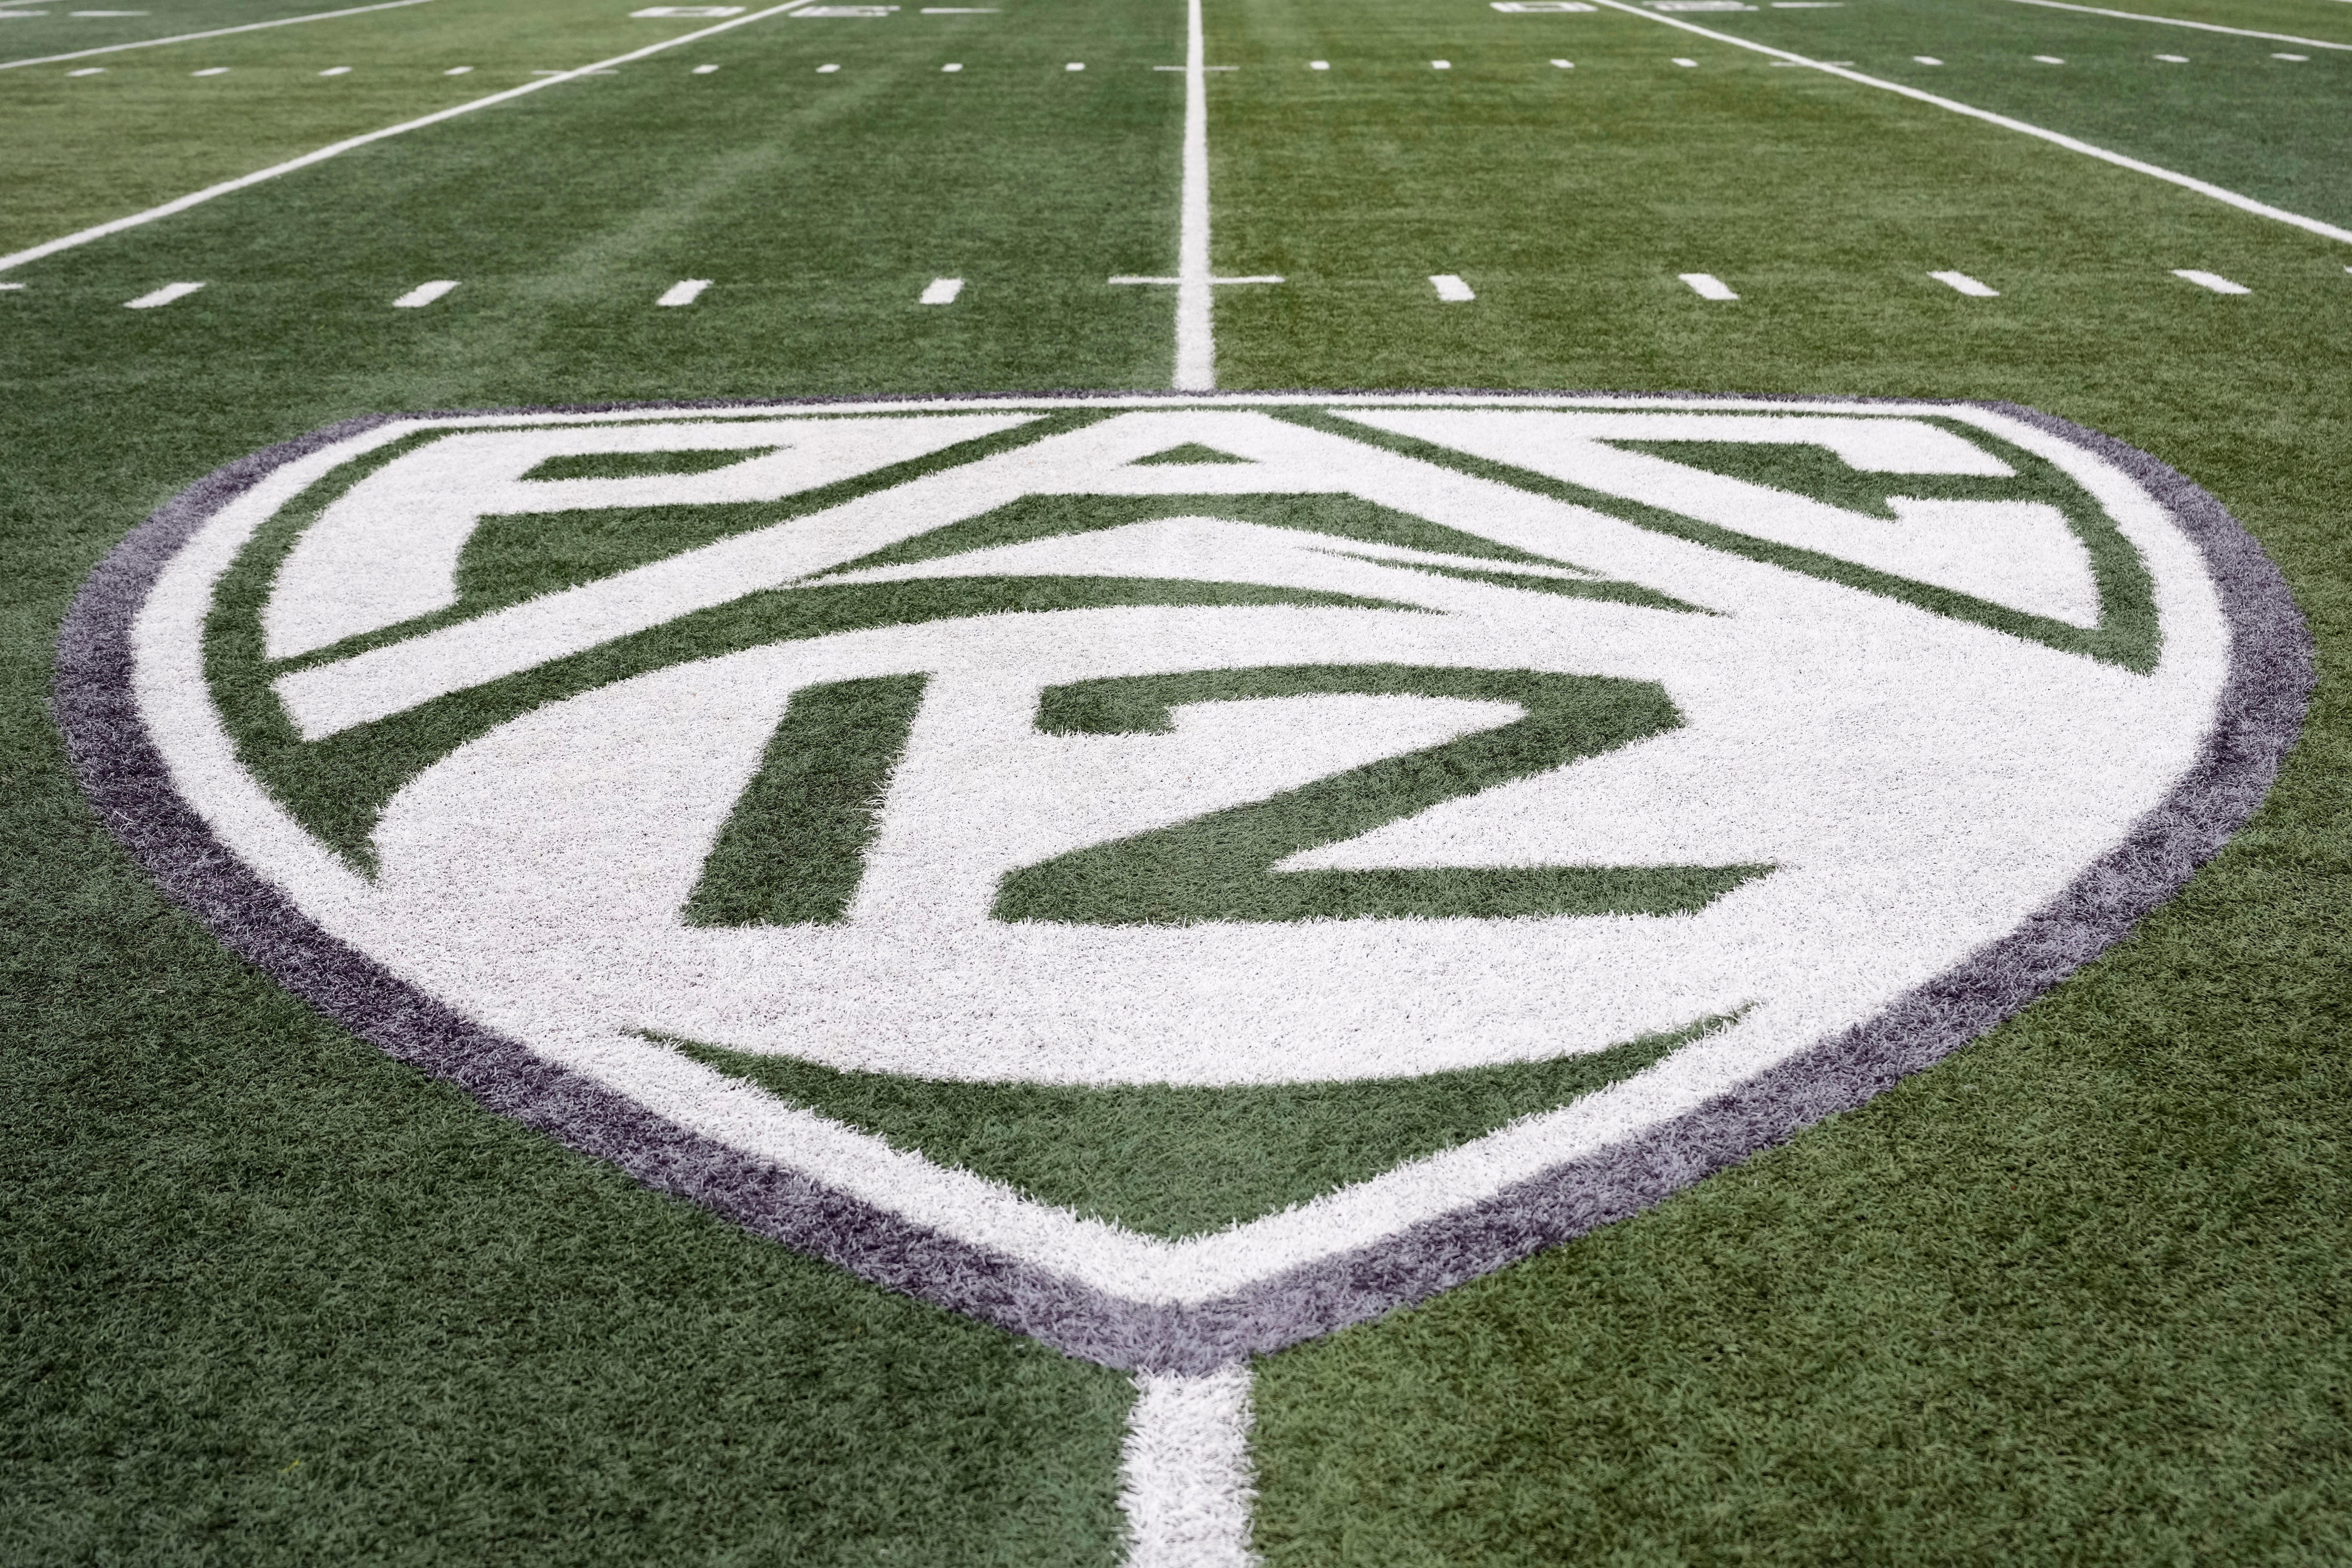 pac-12 conference countersues holiday bowl amid swirling changes